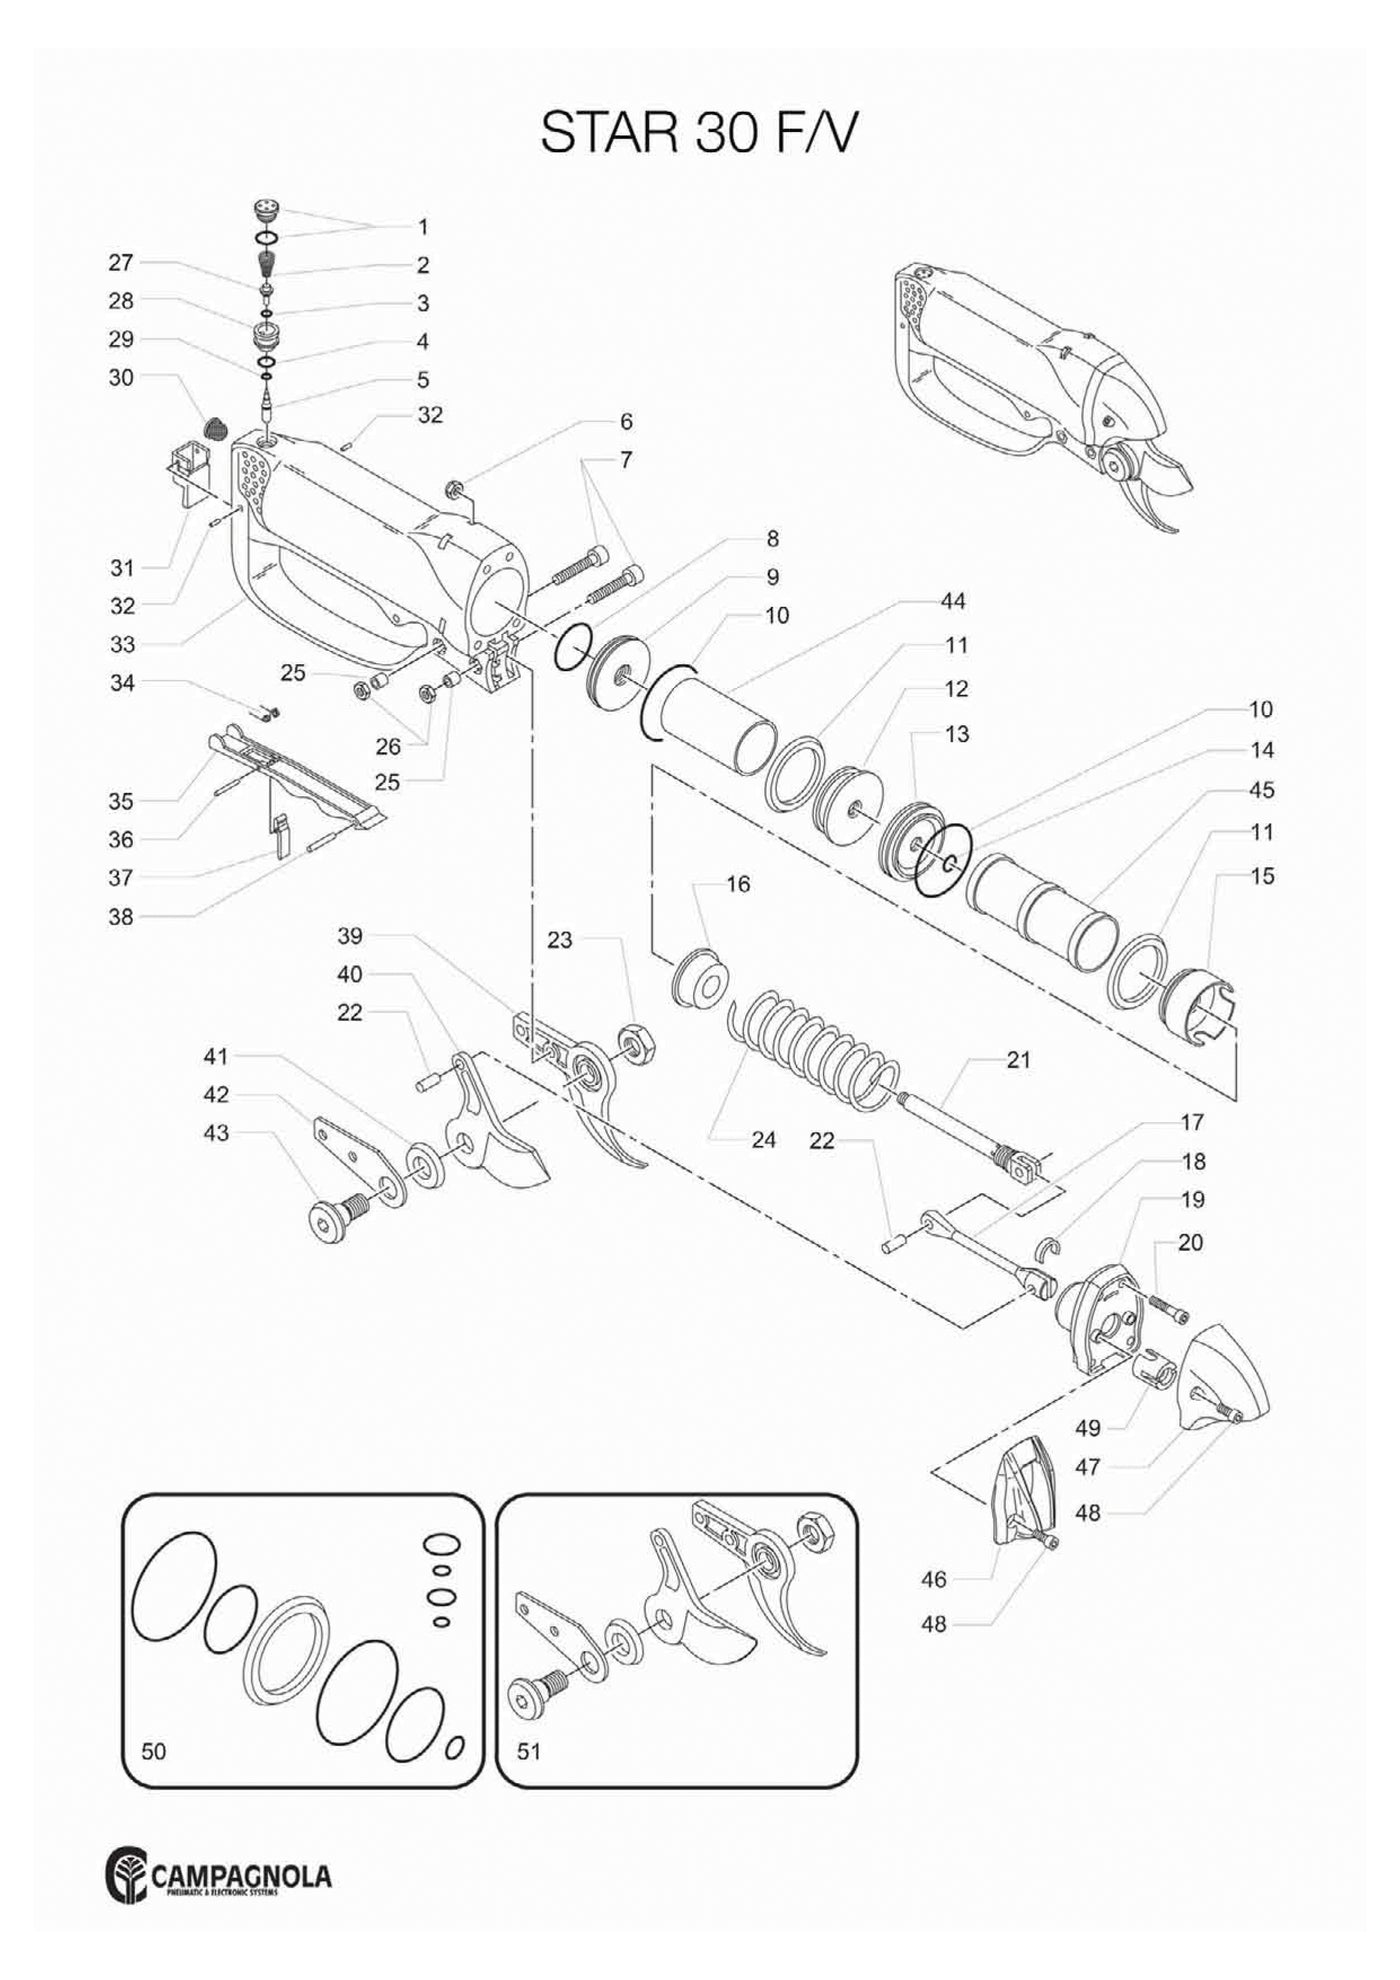 Campagnola Star 50 and F6 Lopper Parts Guide